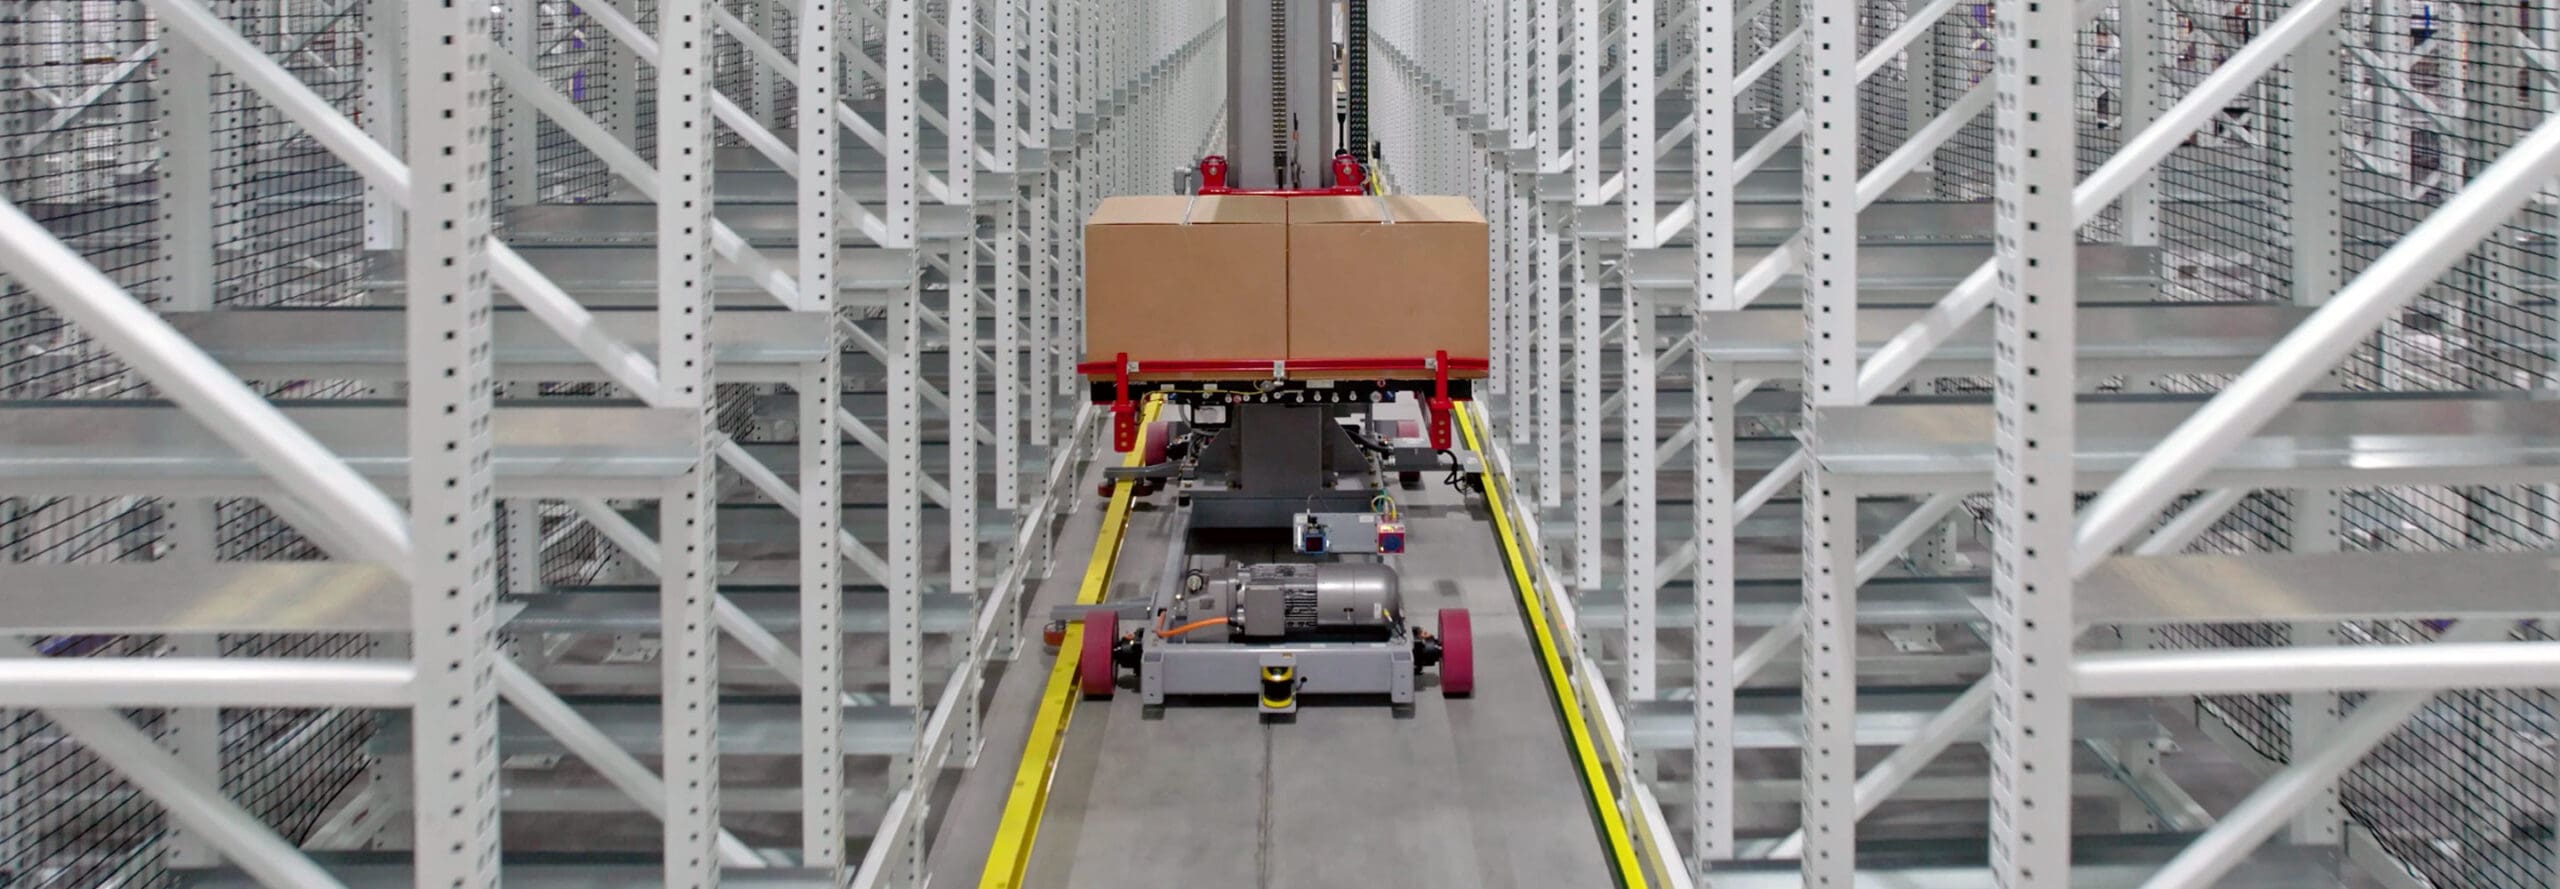 automated storage and retrieval system asrs in warehouse